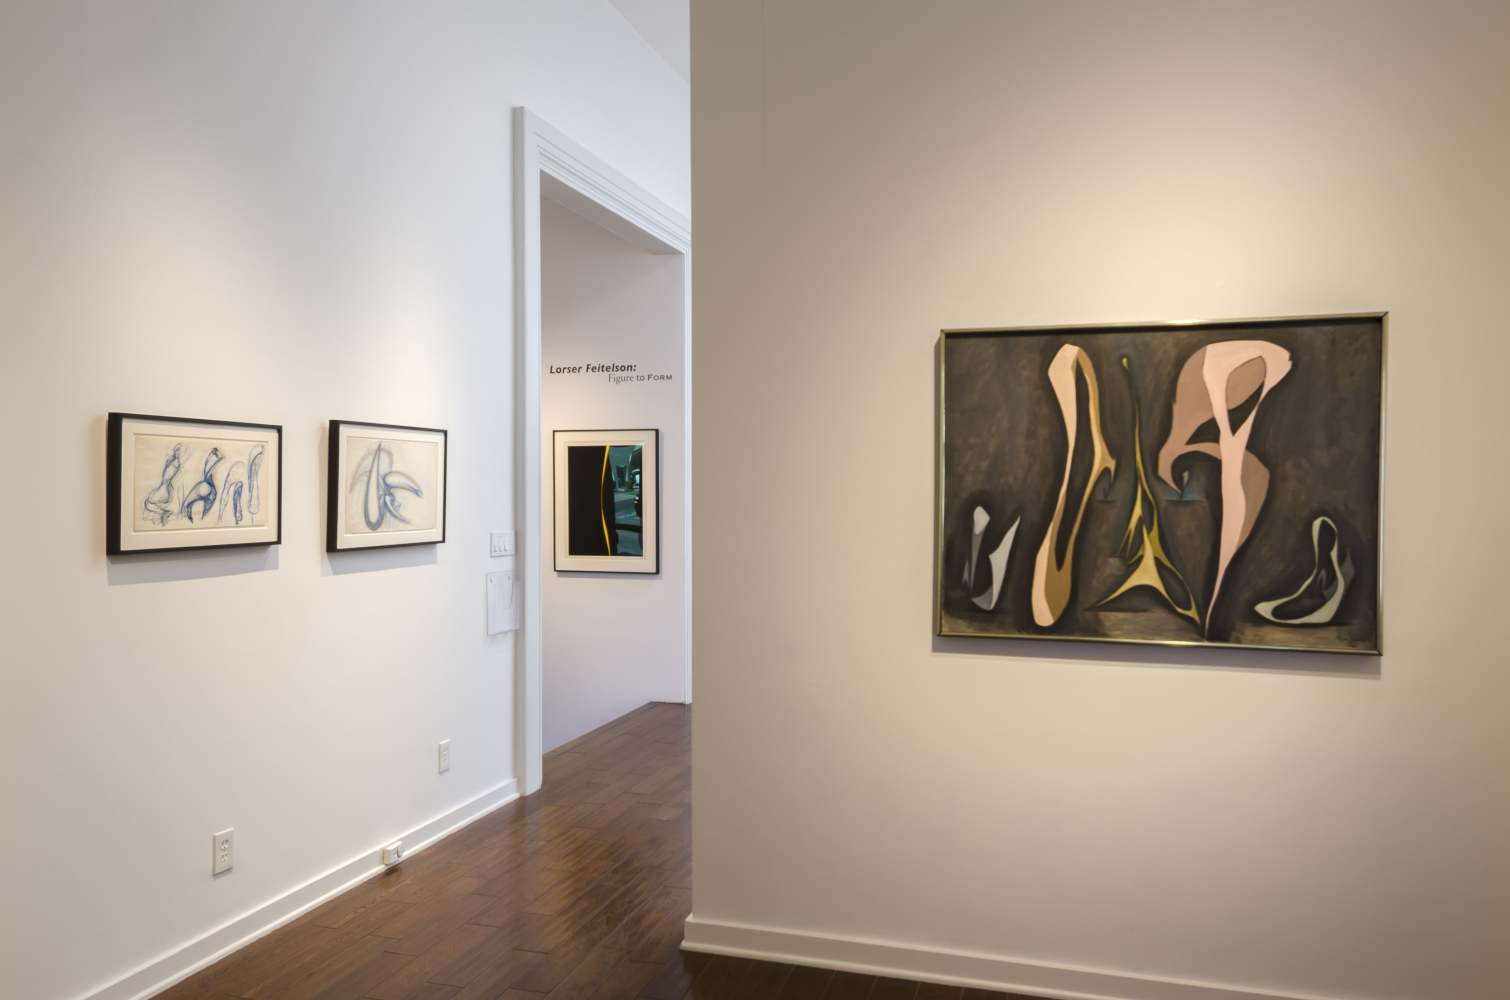 Lorser Feitelson: Figure to Form